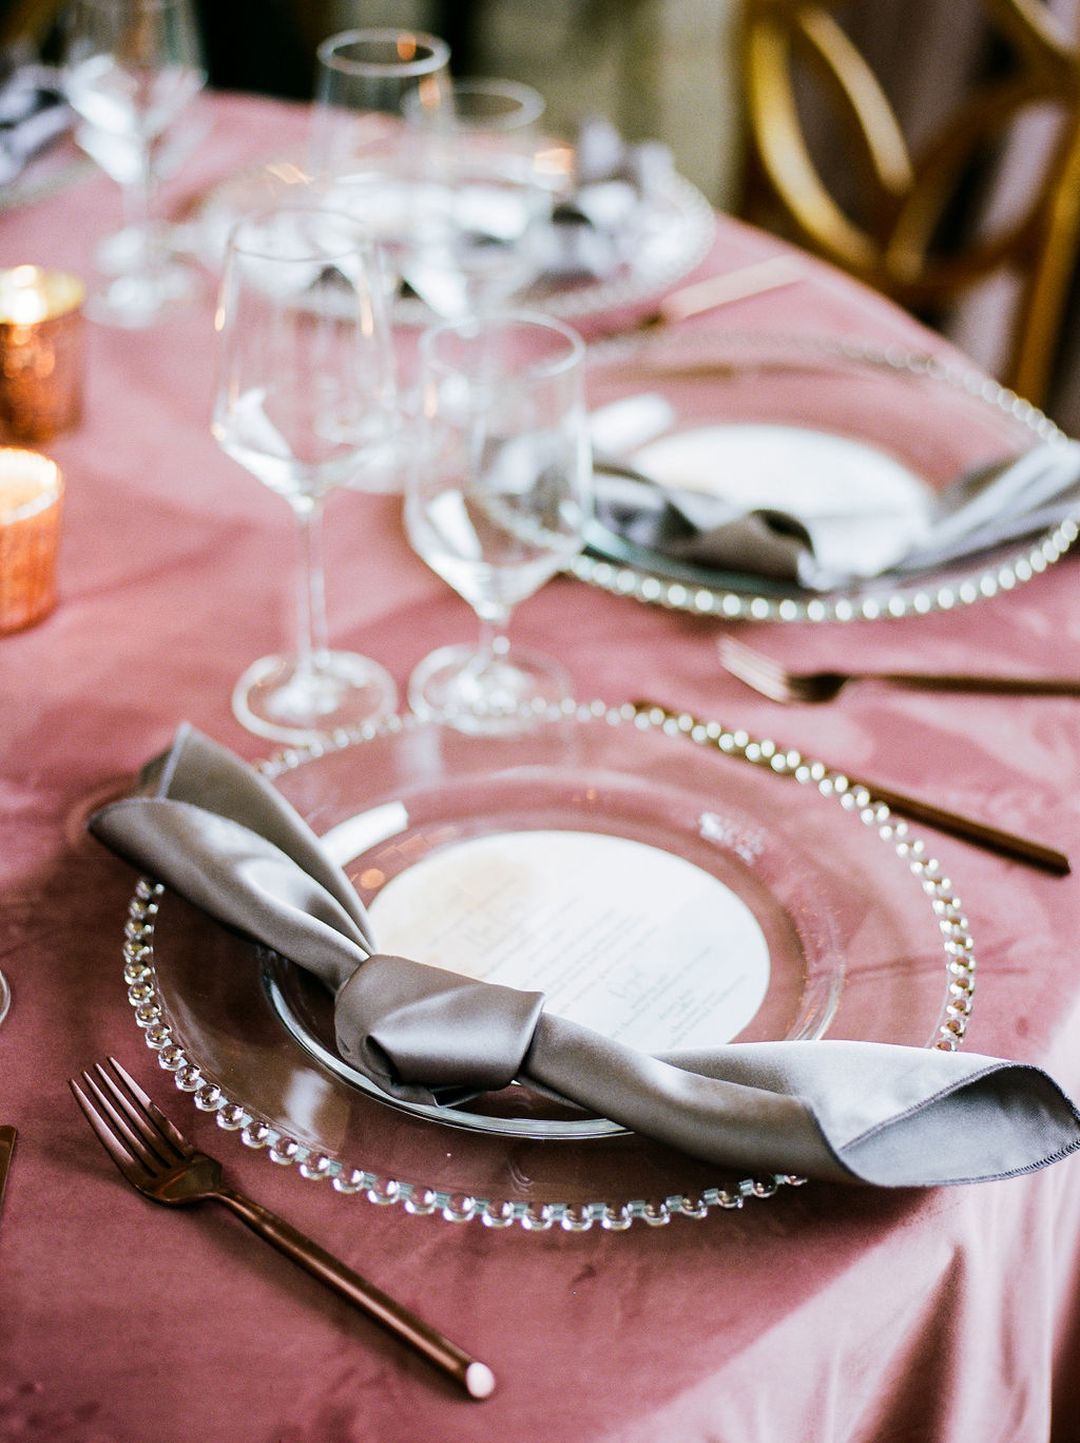 In Stock: Luxe Napkins for Elegant Tablescapes